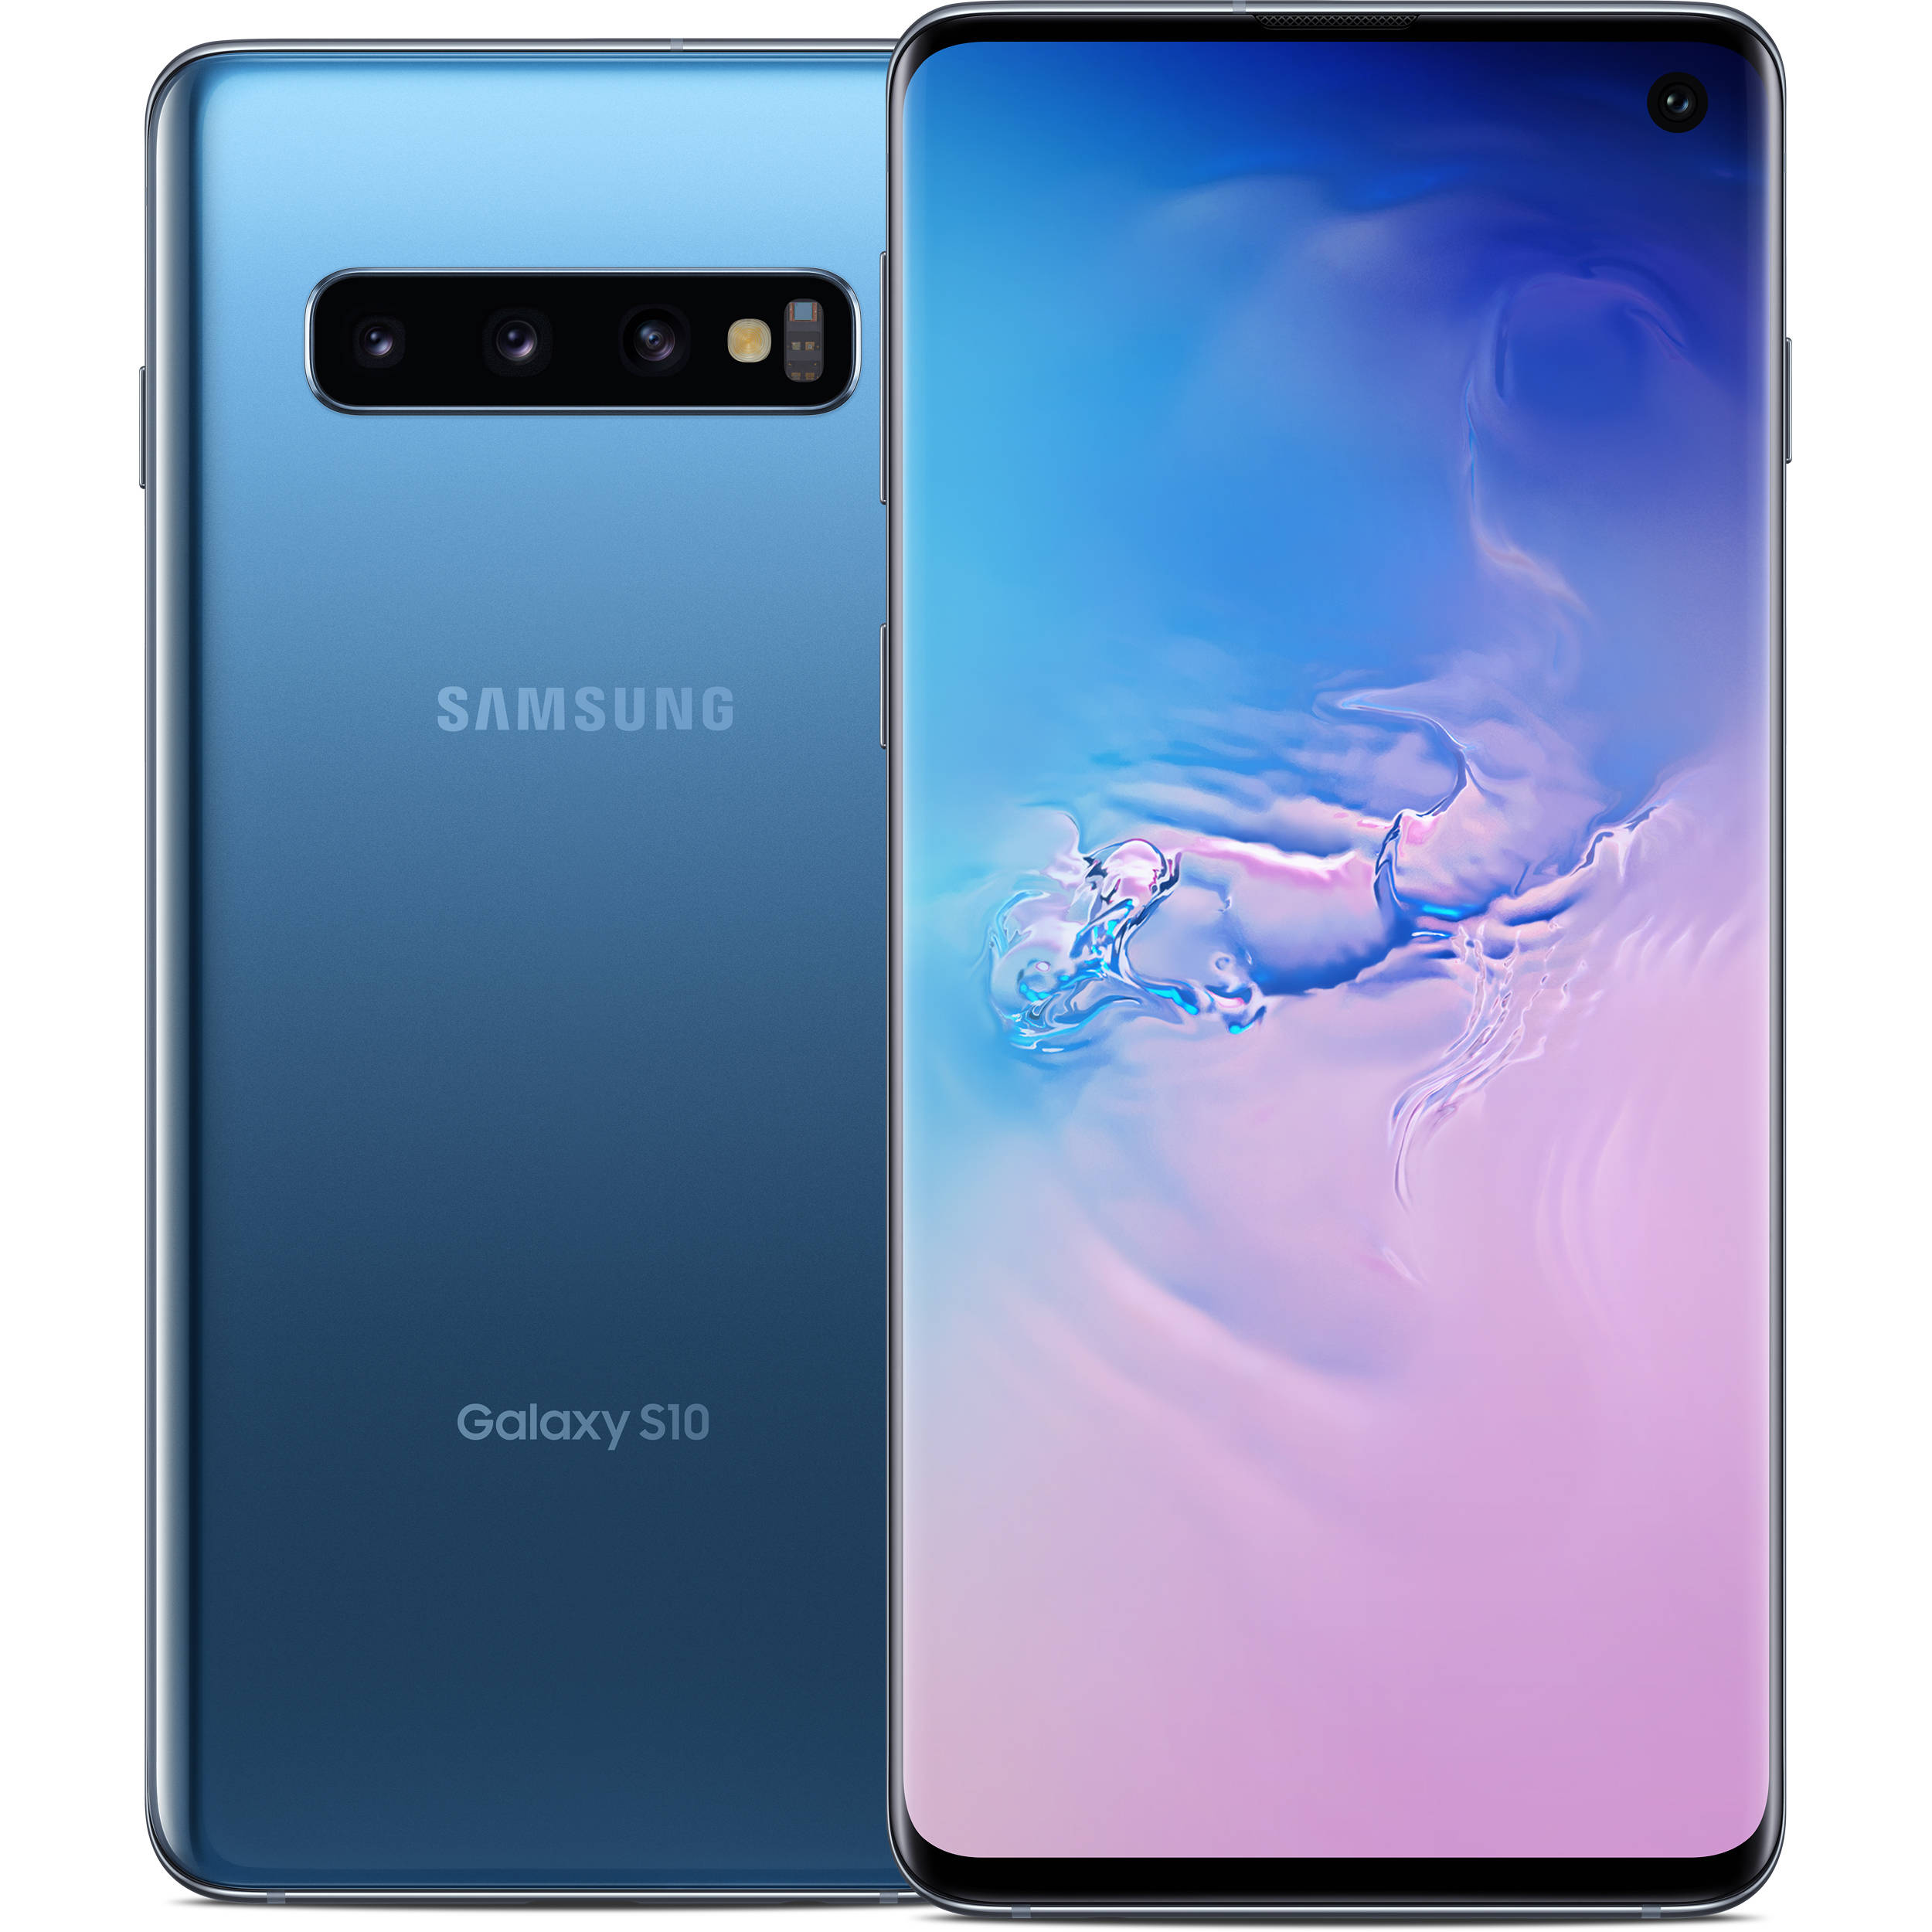 Pre-Owned Samsung Galaxy S10 G973U 128GB GSM/CDMA Unlocked Android Phone - Prism Blue (Refurbished: Good) - image 1 of 3